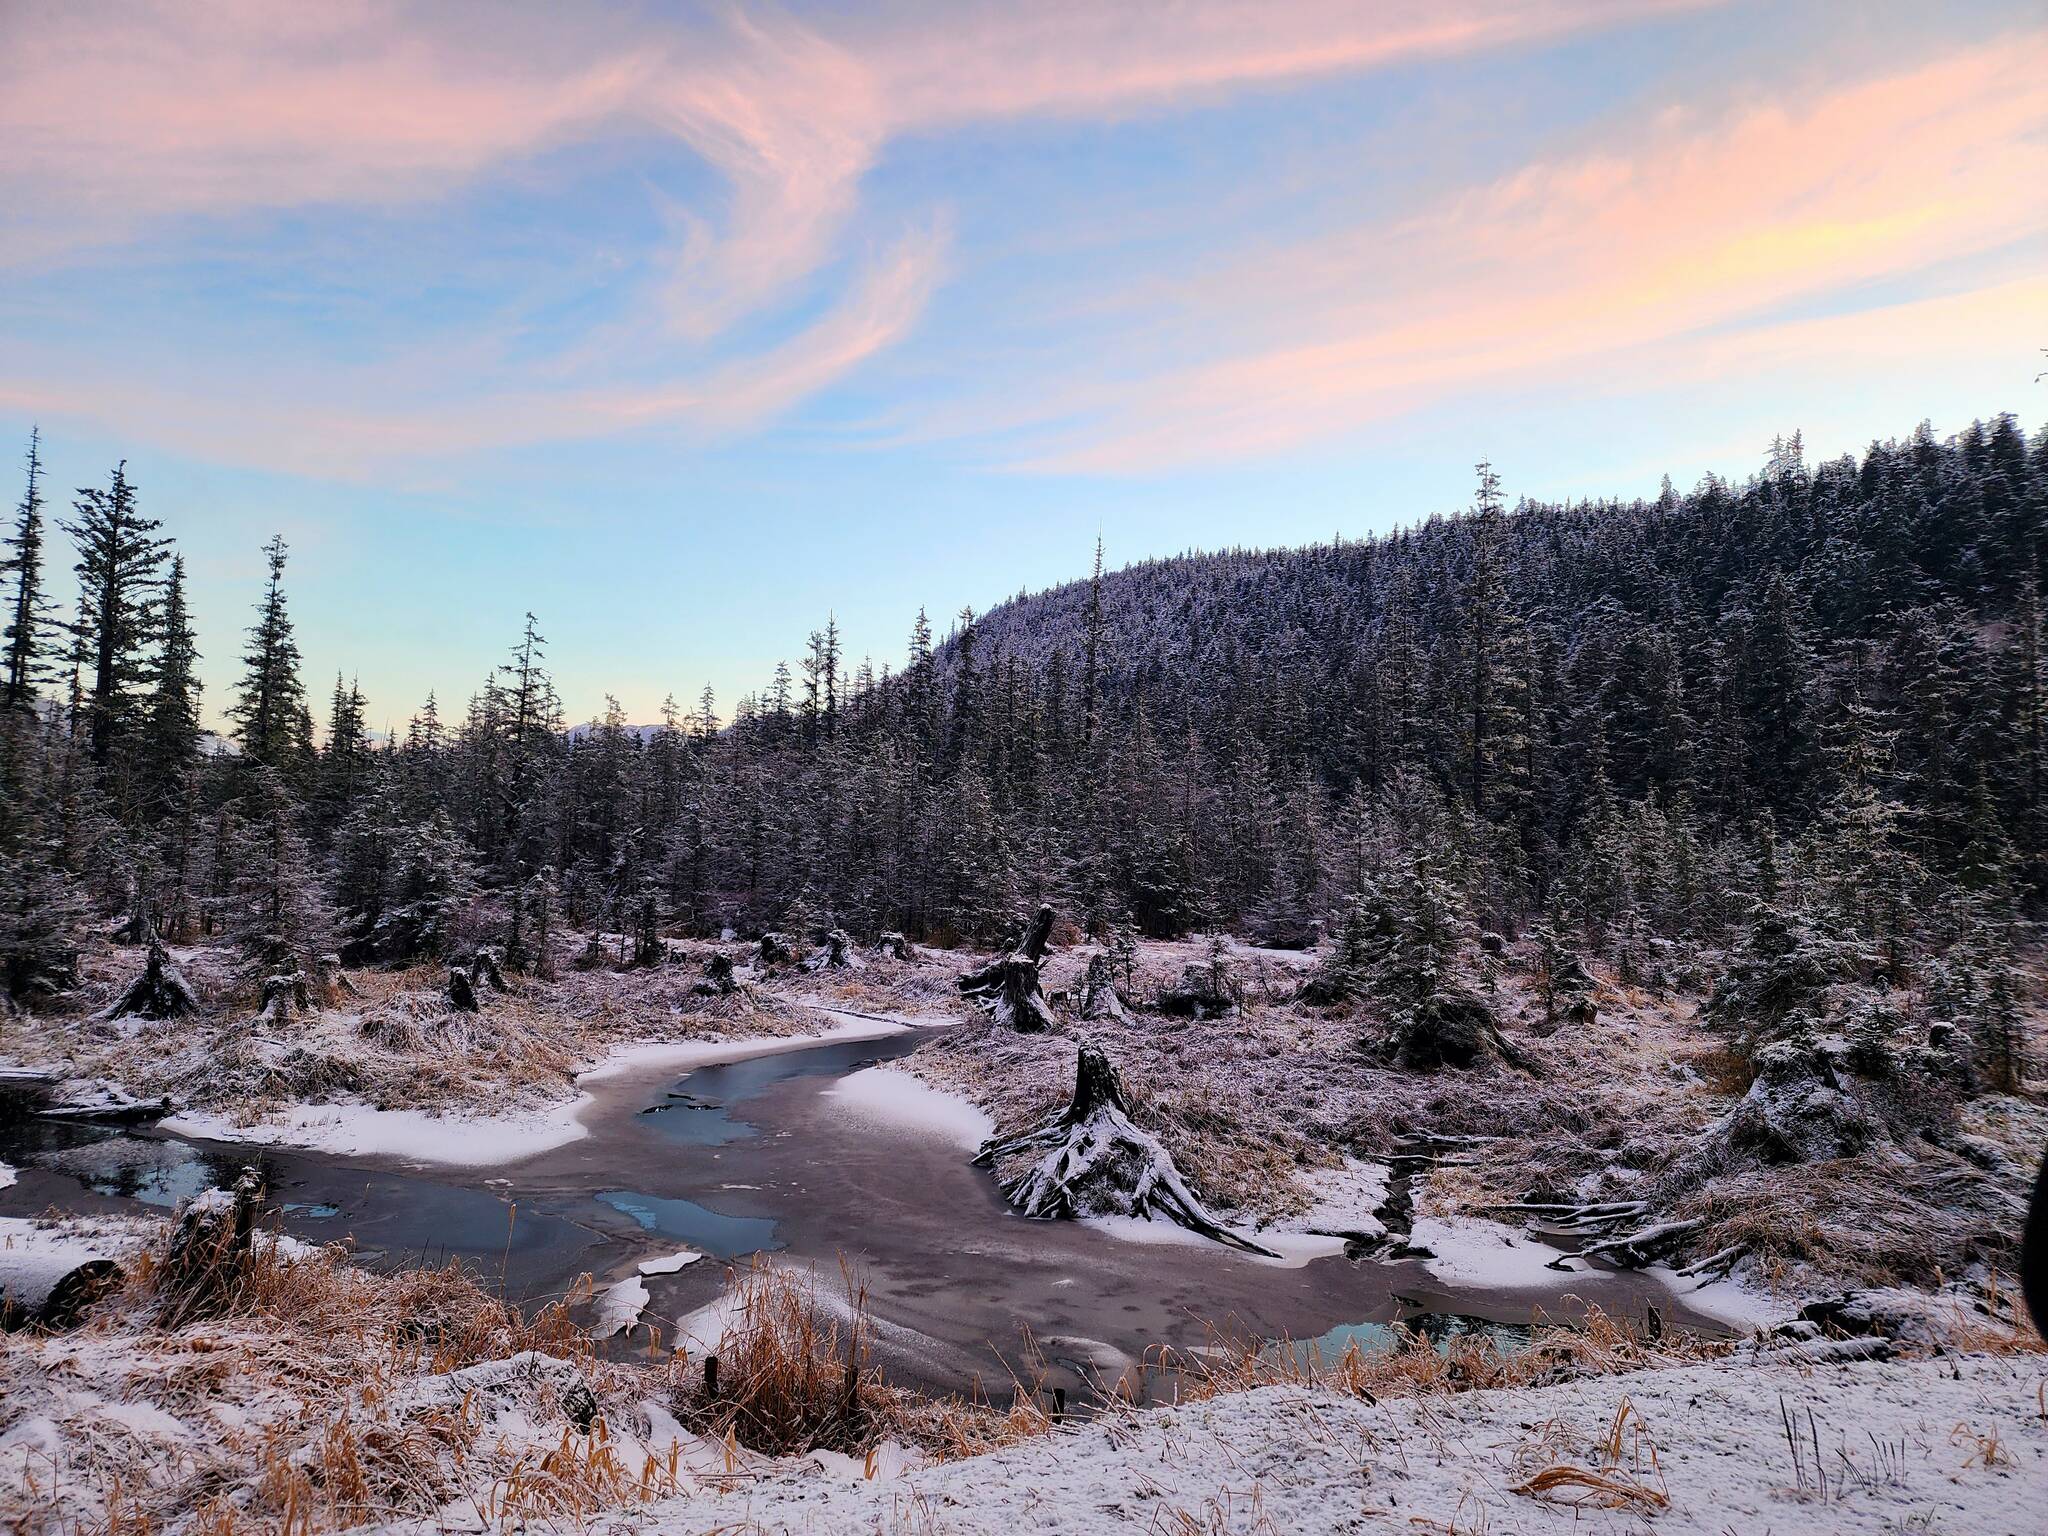 An alpenglow sunset near the Cowee Creek Trailhead the day after Thanksgiving 2022. (Photo by Amanda Ristau)